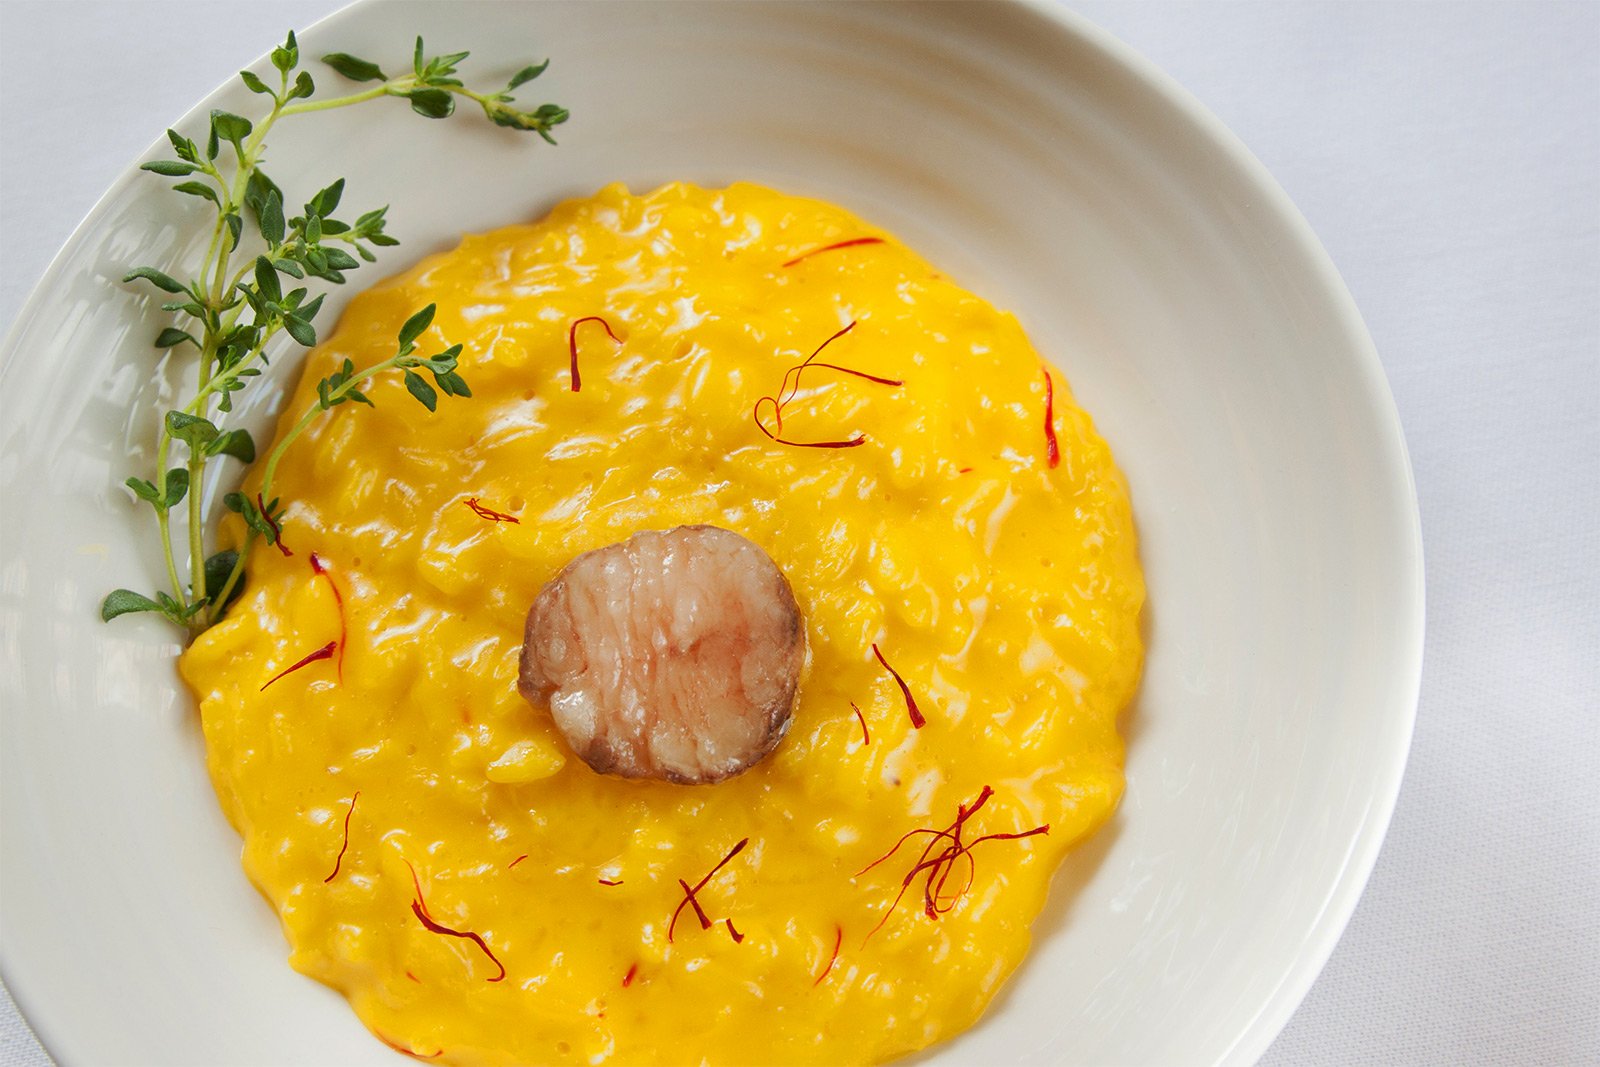 How to try risotto Milanese in Milan